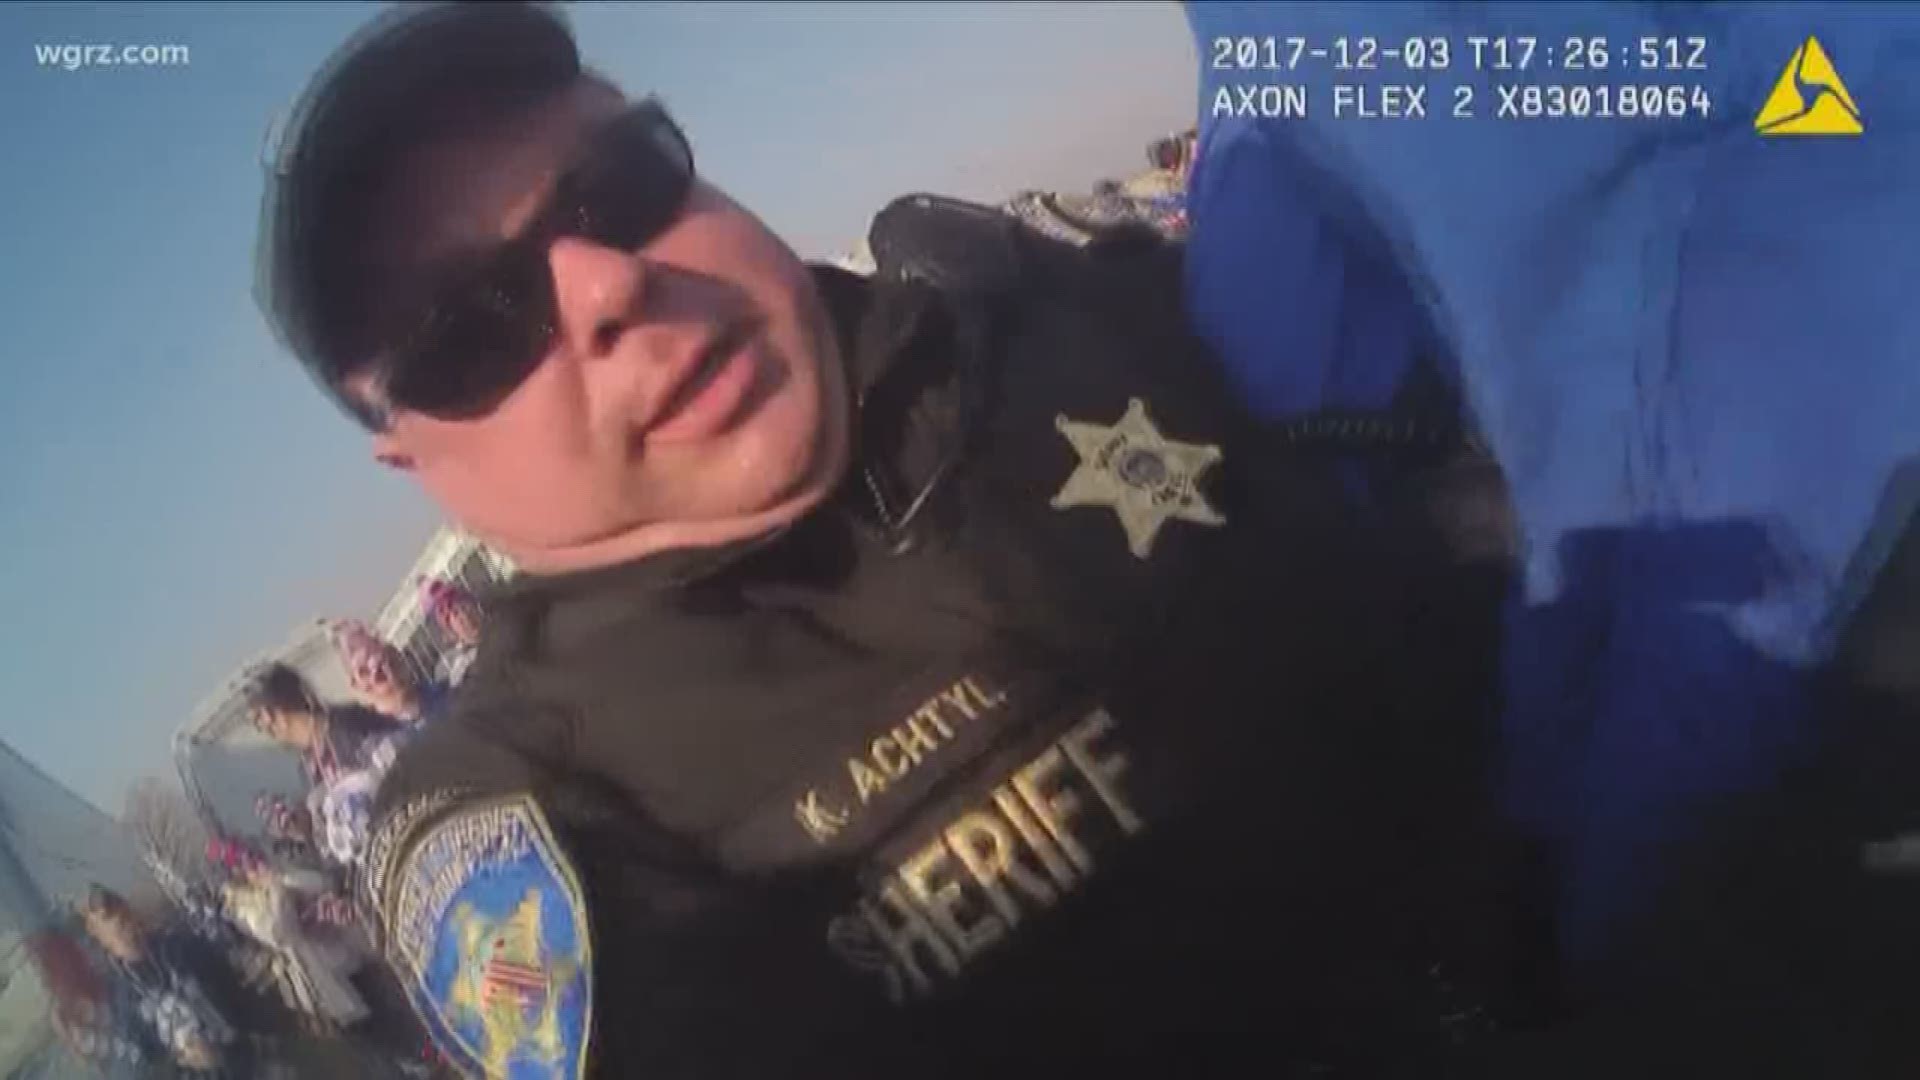 Deputy Achtyl faces misdemeanor charges of assault and official misconduct…as well as falsifying records.